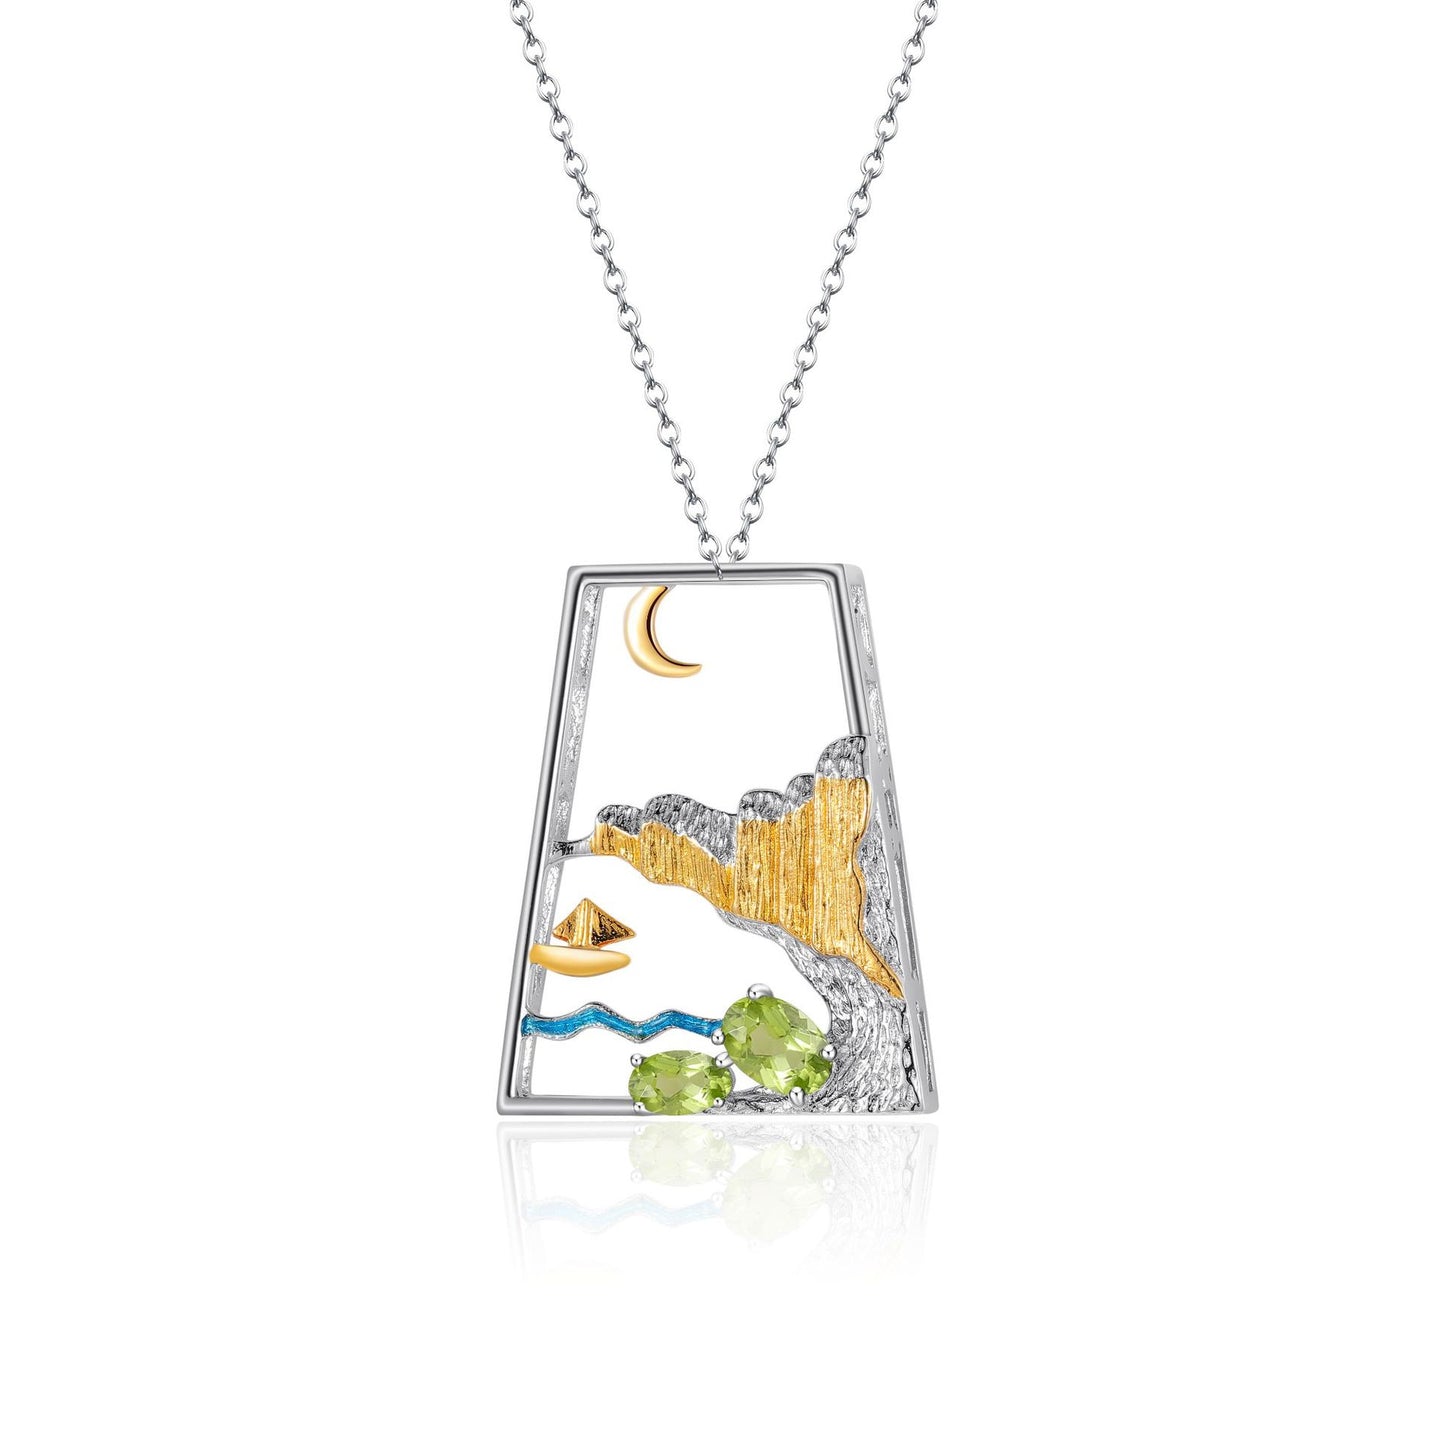 Original Design Inlaid Natural Colourful Gemstone Moonlight Wave Full of Painted Boats High Beauty Pendant Silver Necklace for Women